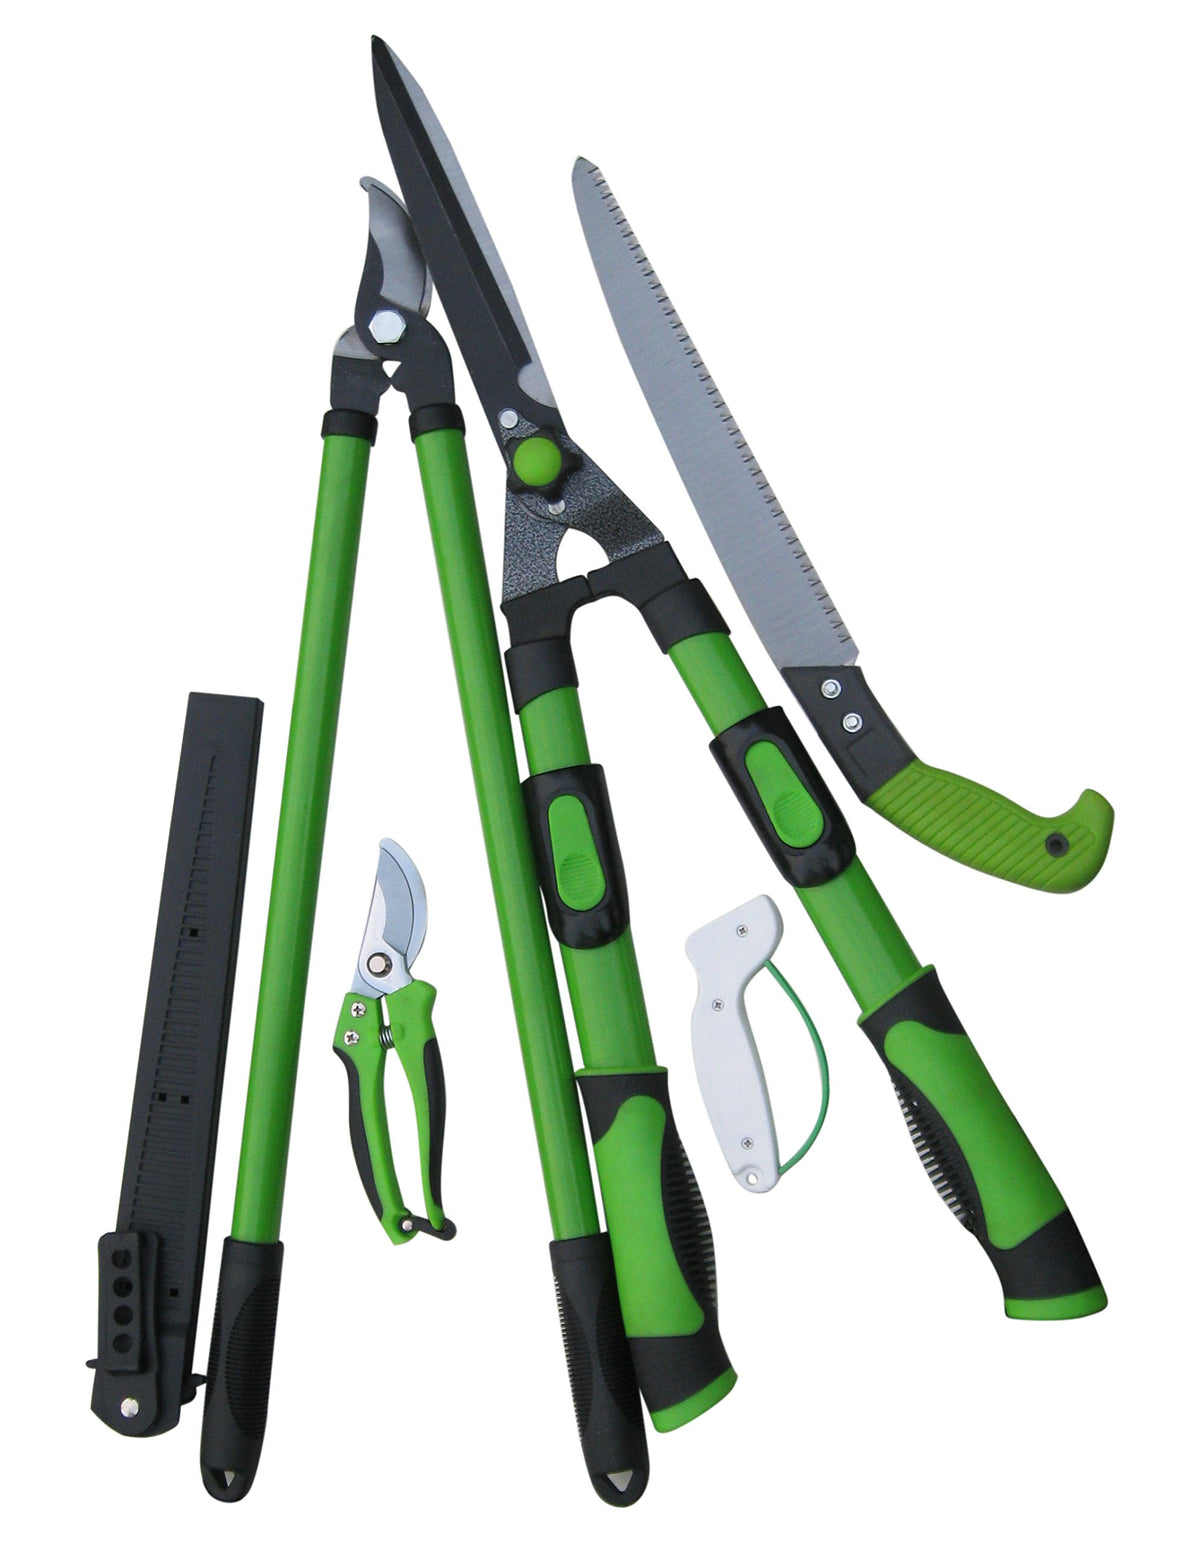 5 pcs Pruning Gardening Tools Set includes Hedge Shears , Bypass Loppers , Pruners , Hand Saw &amp; a Handy Tools &amp; Knife Sharpener by GardeniaPro